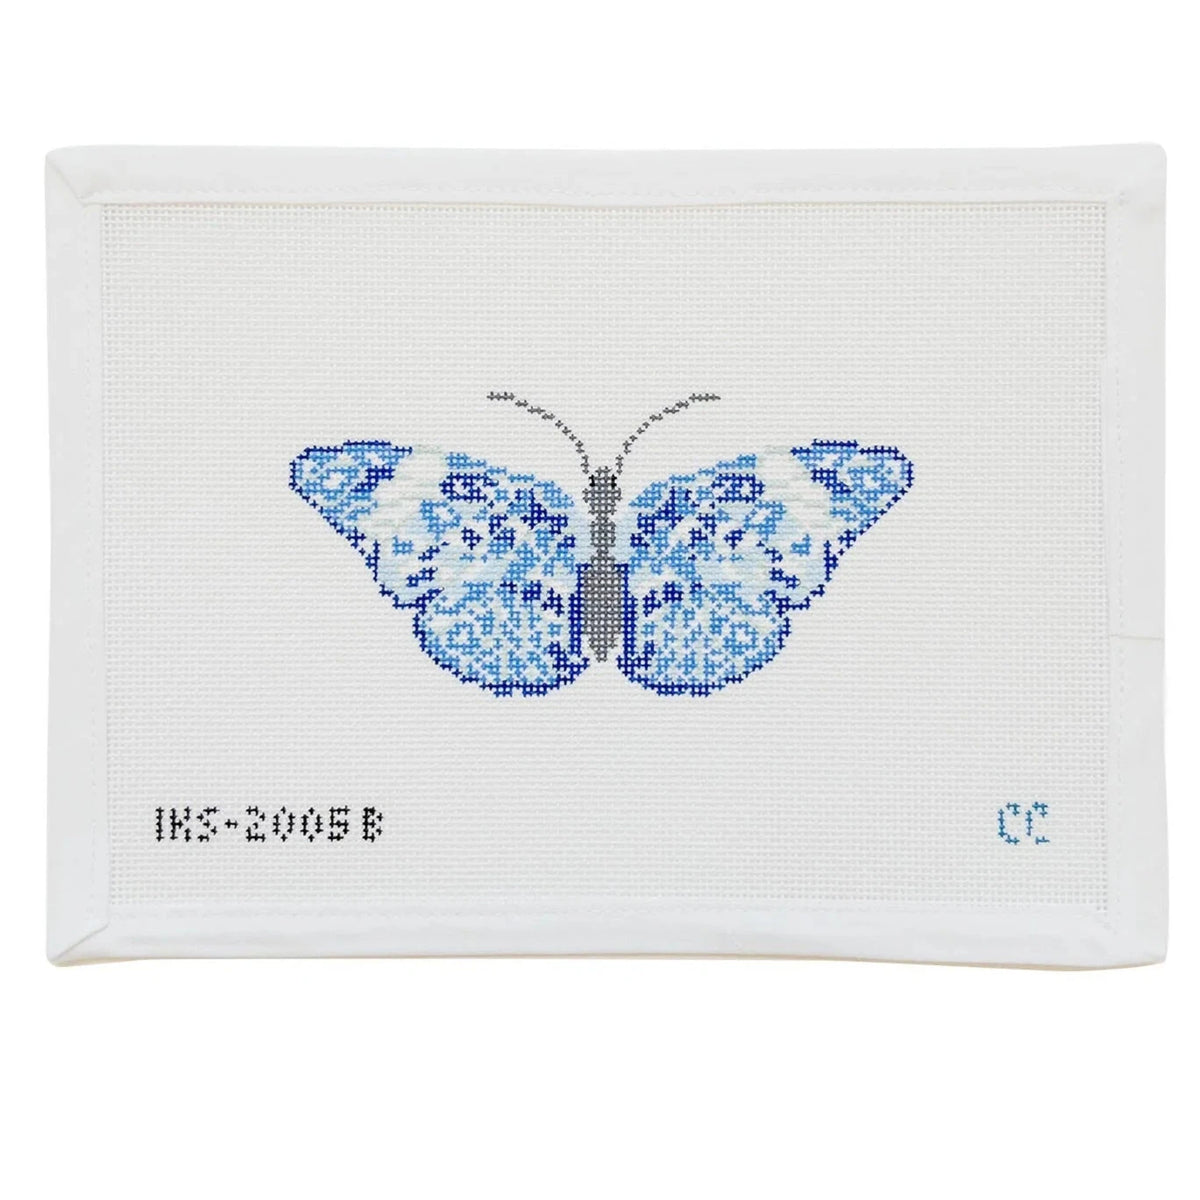 Initial K Studio Chinoiserie Butterfly Ornament Needlepoint Canvas